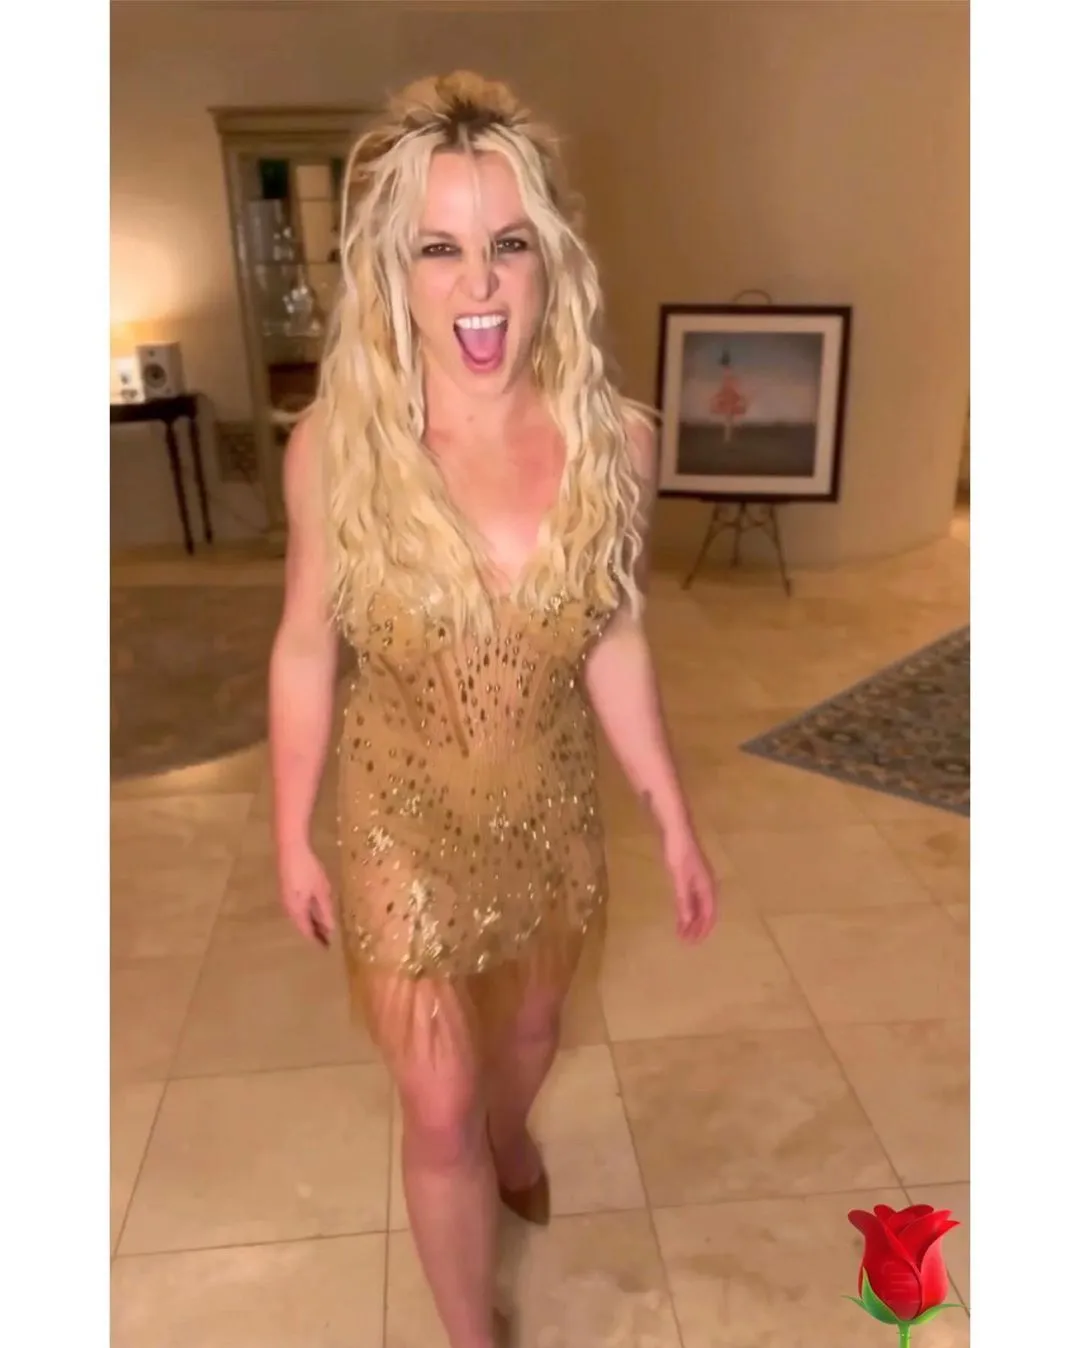 Why Britney Spears often doesn't sleep for three days, dances with knives, and shows her naked body: 5 interesting facts about the 2000s pop icon who turned 42 today